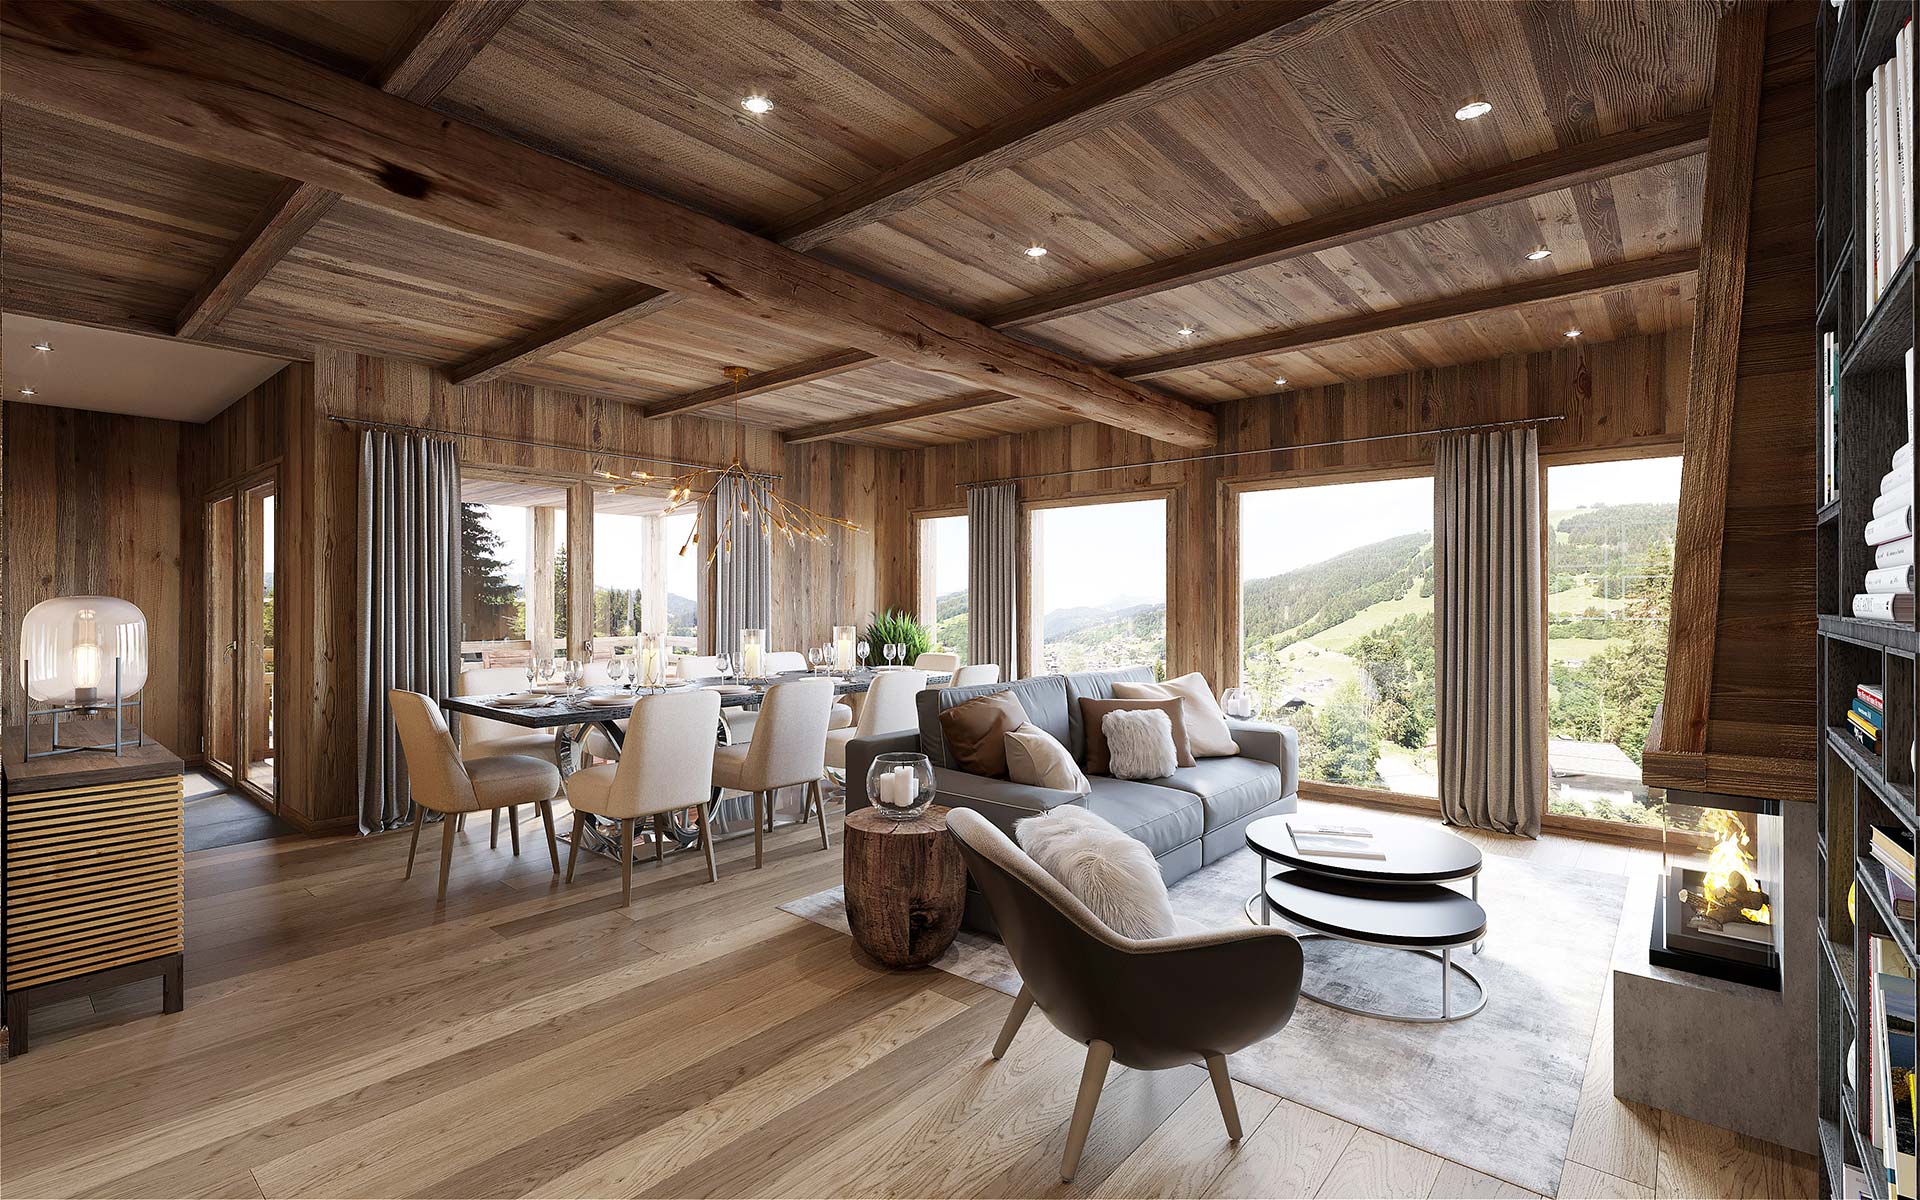 3D interior render of a luxury chalet apartment